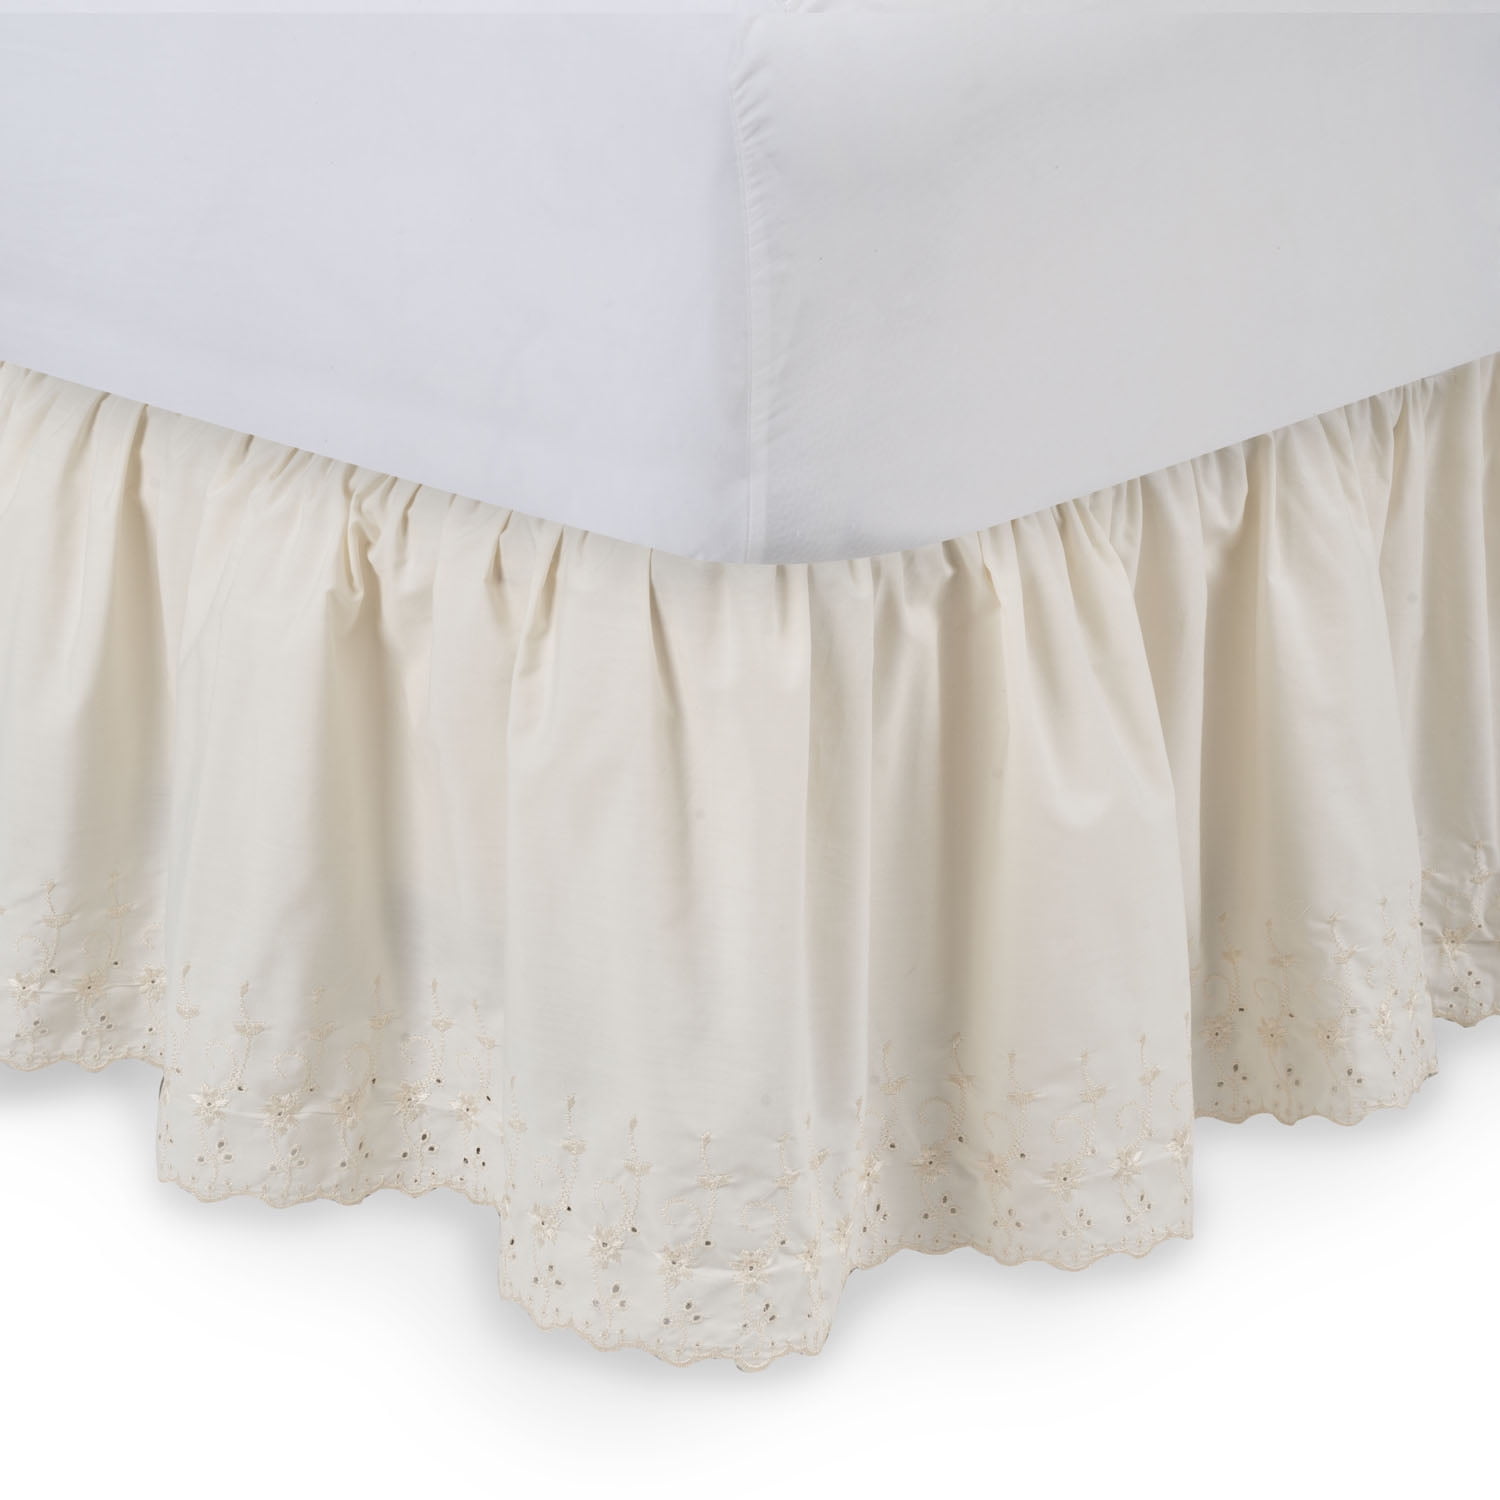 WRAP AROUND EYELET LACE BED SKIRT DUST RUFFLE 14" DROP 